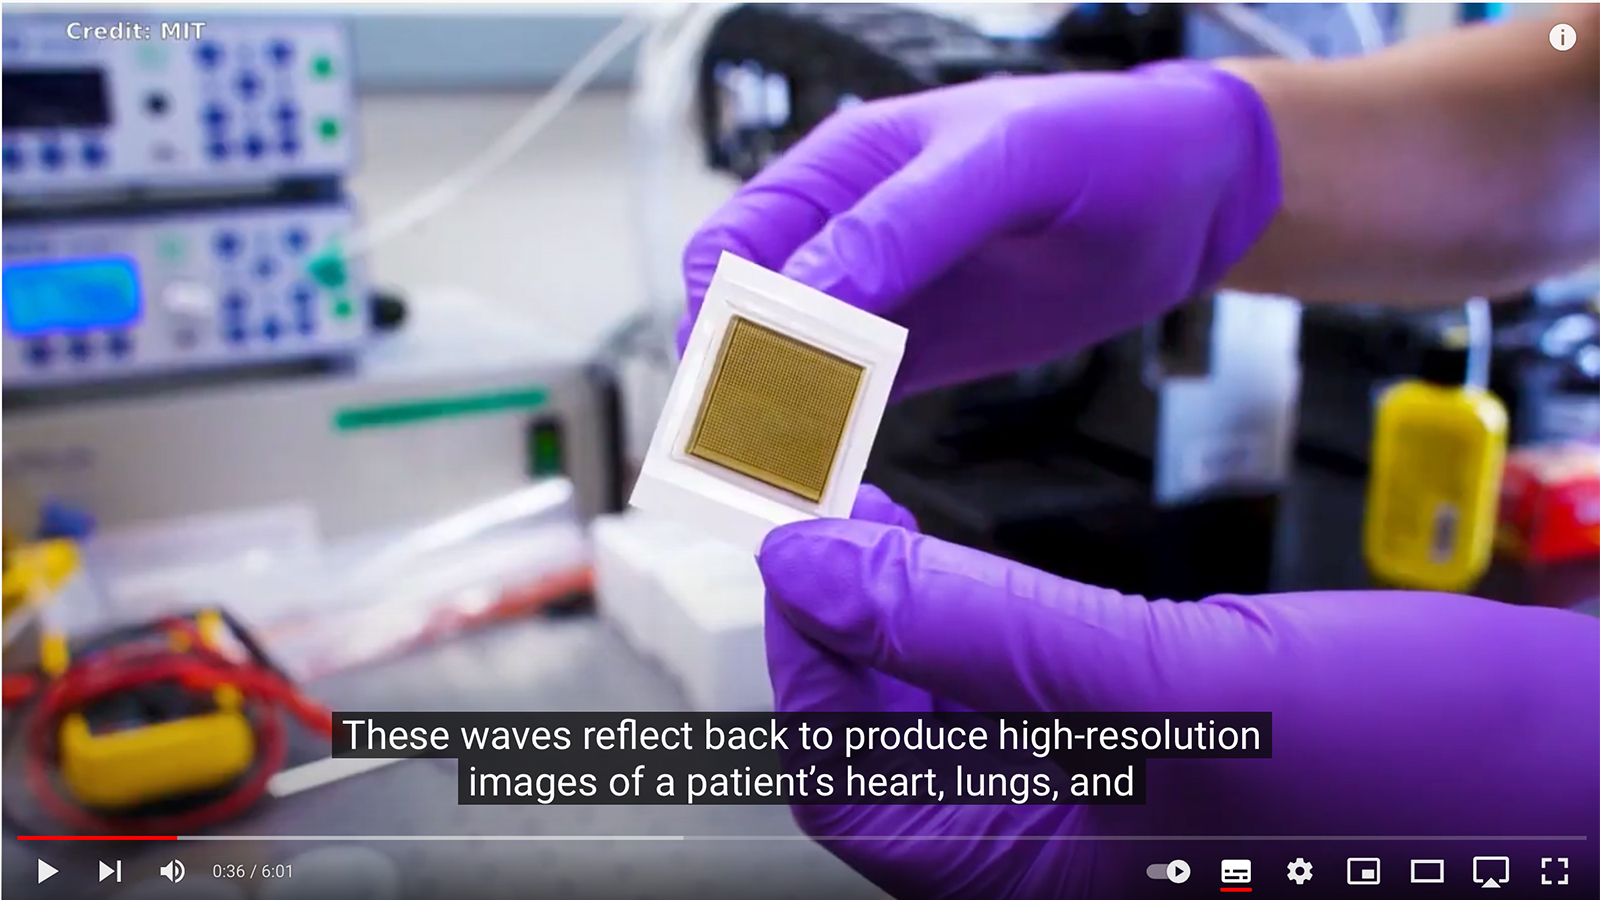 Smart patch provides utrasound images from the body / Credit: MIT